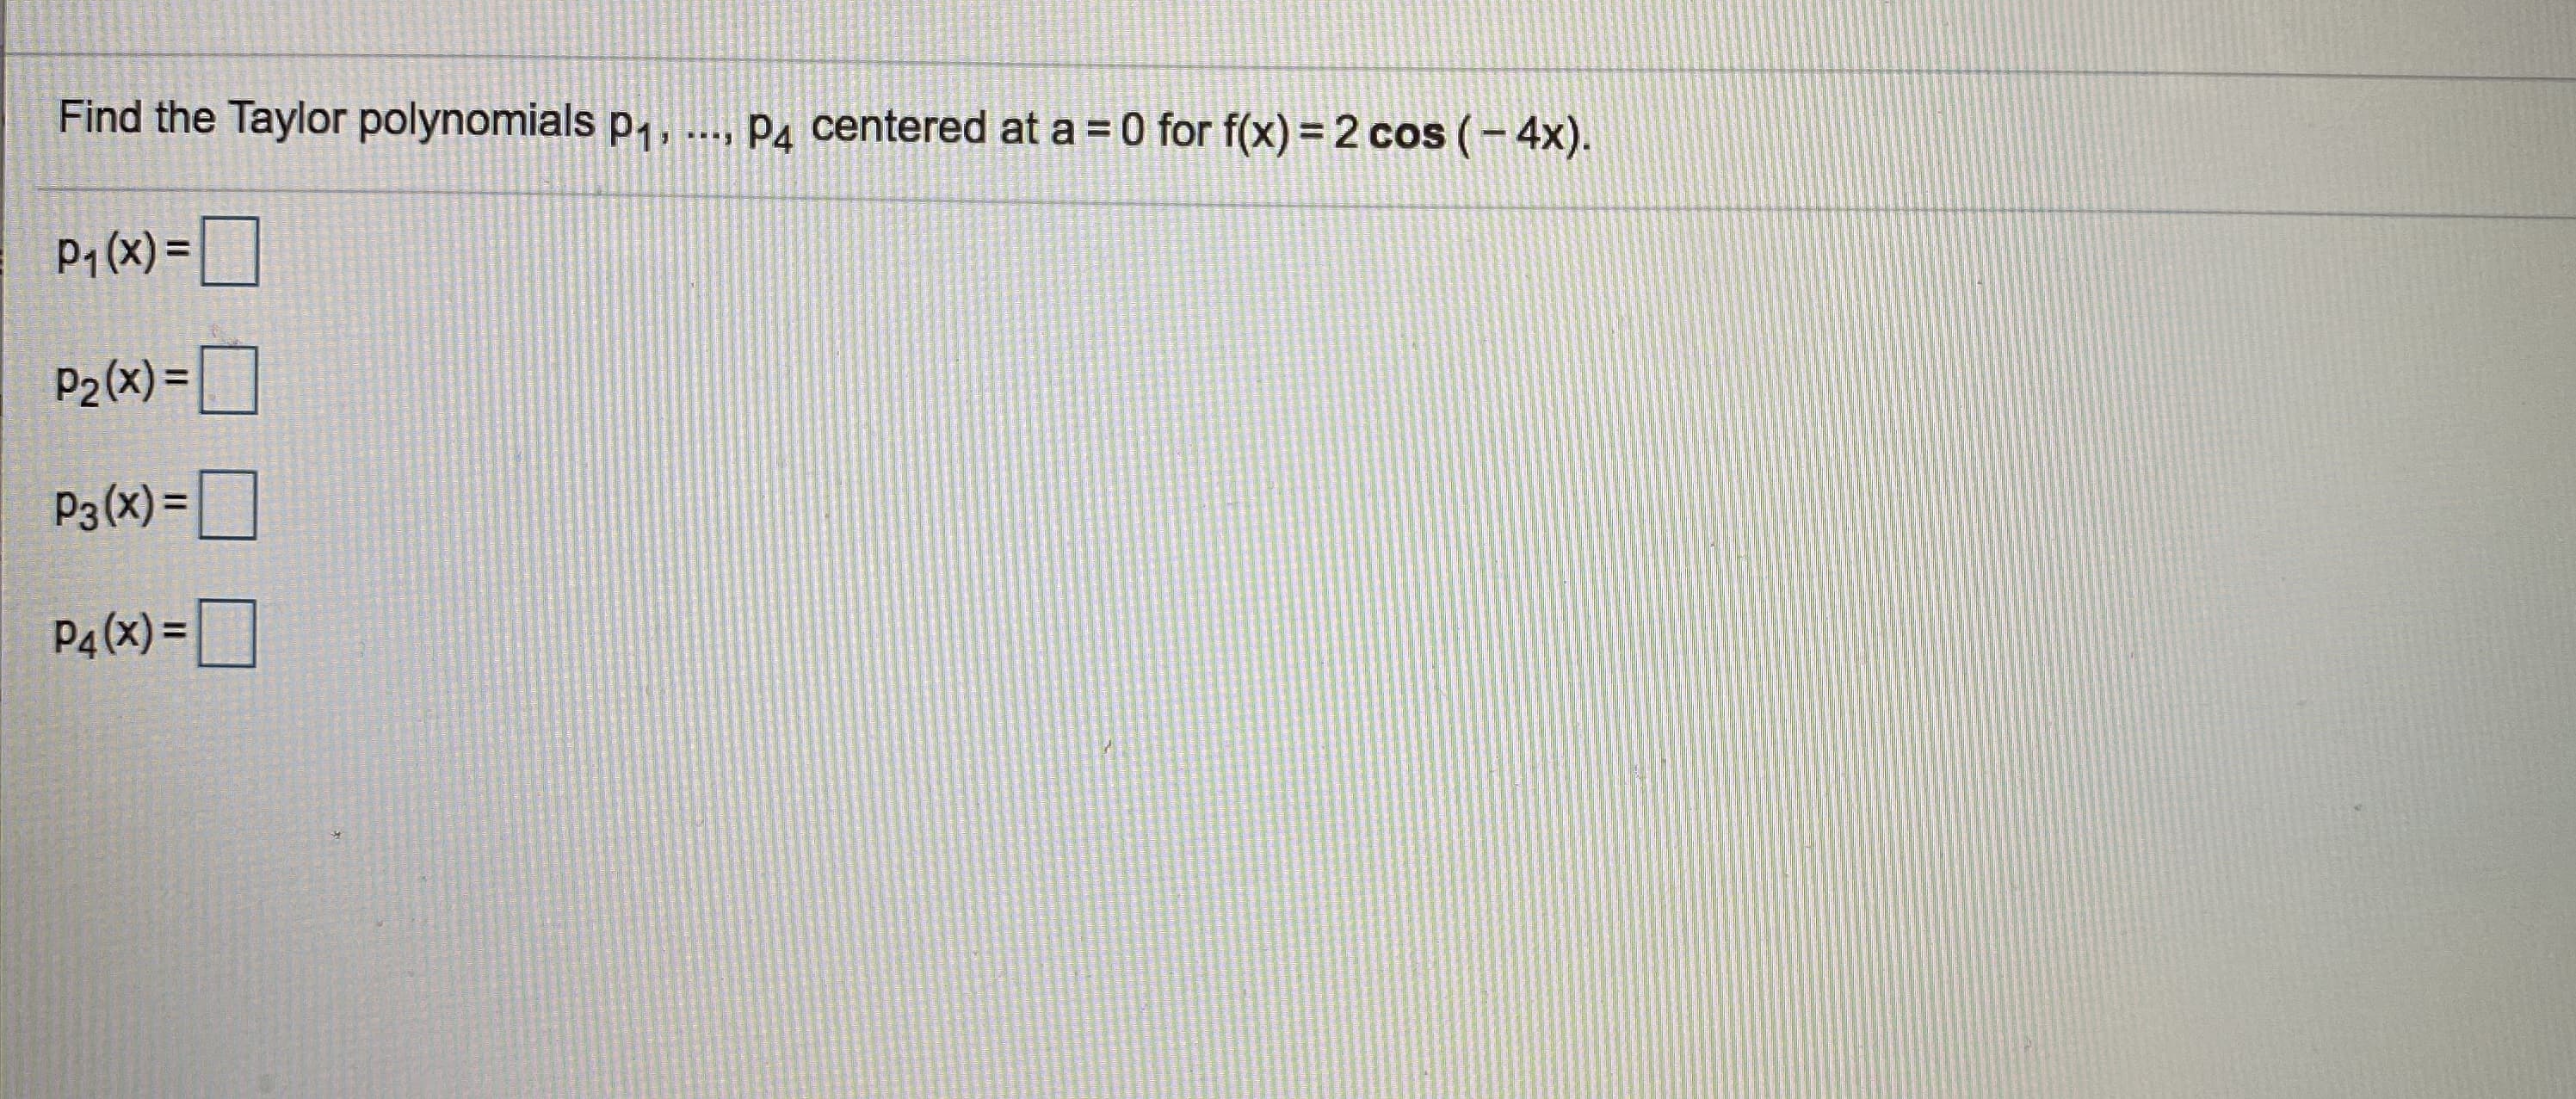 Find the Taylor polynomials p1,
Pa centered at a = 0 for f(x) =2 cos (- 4x).
